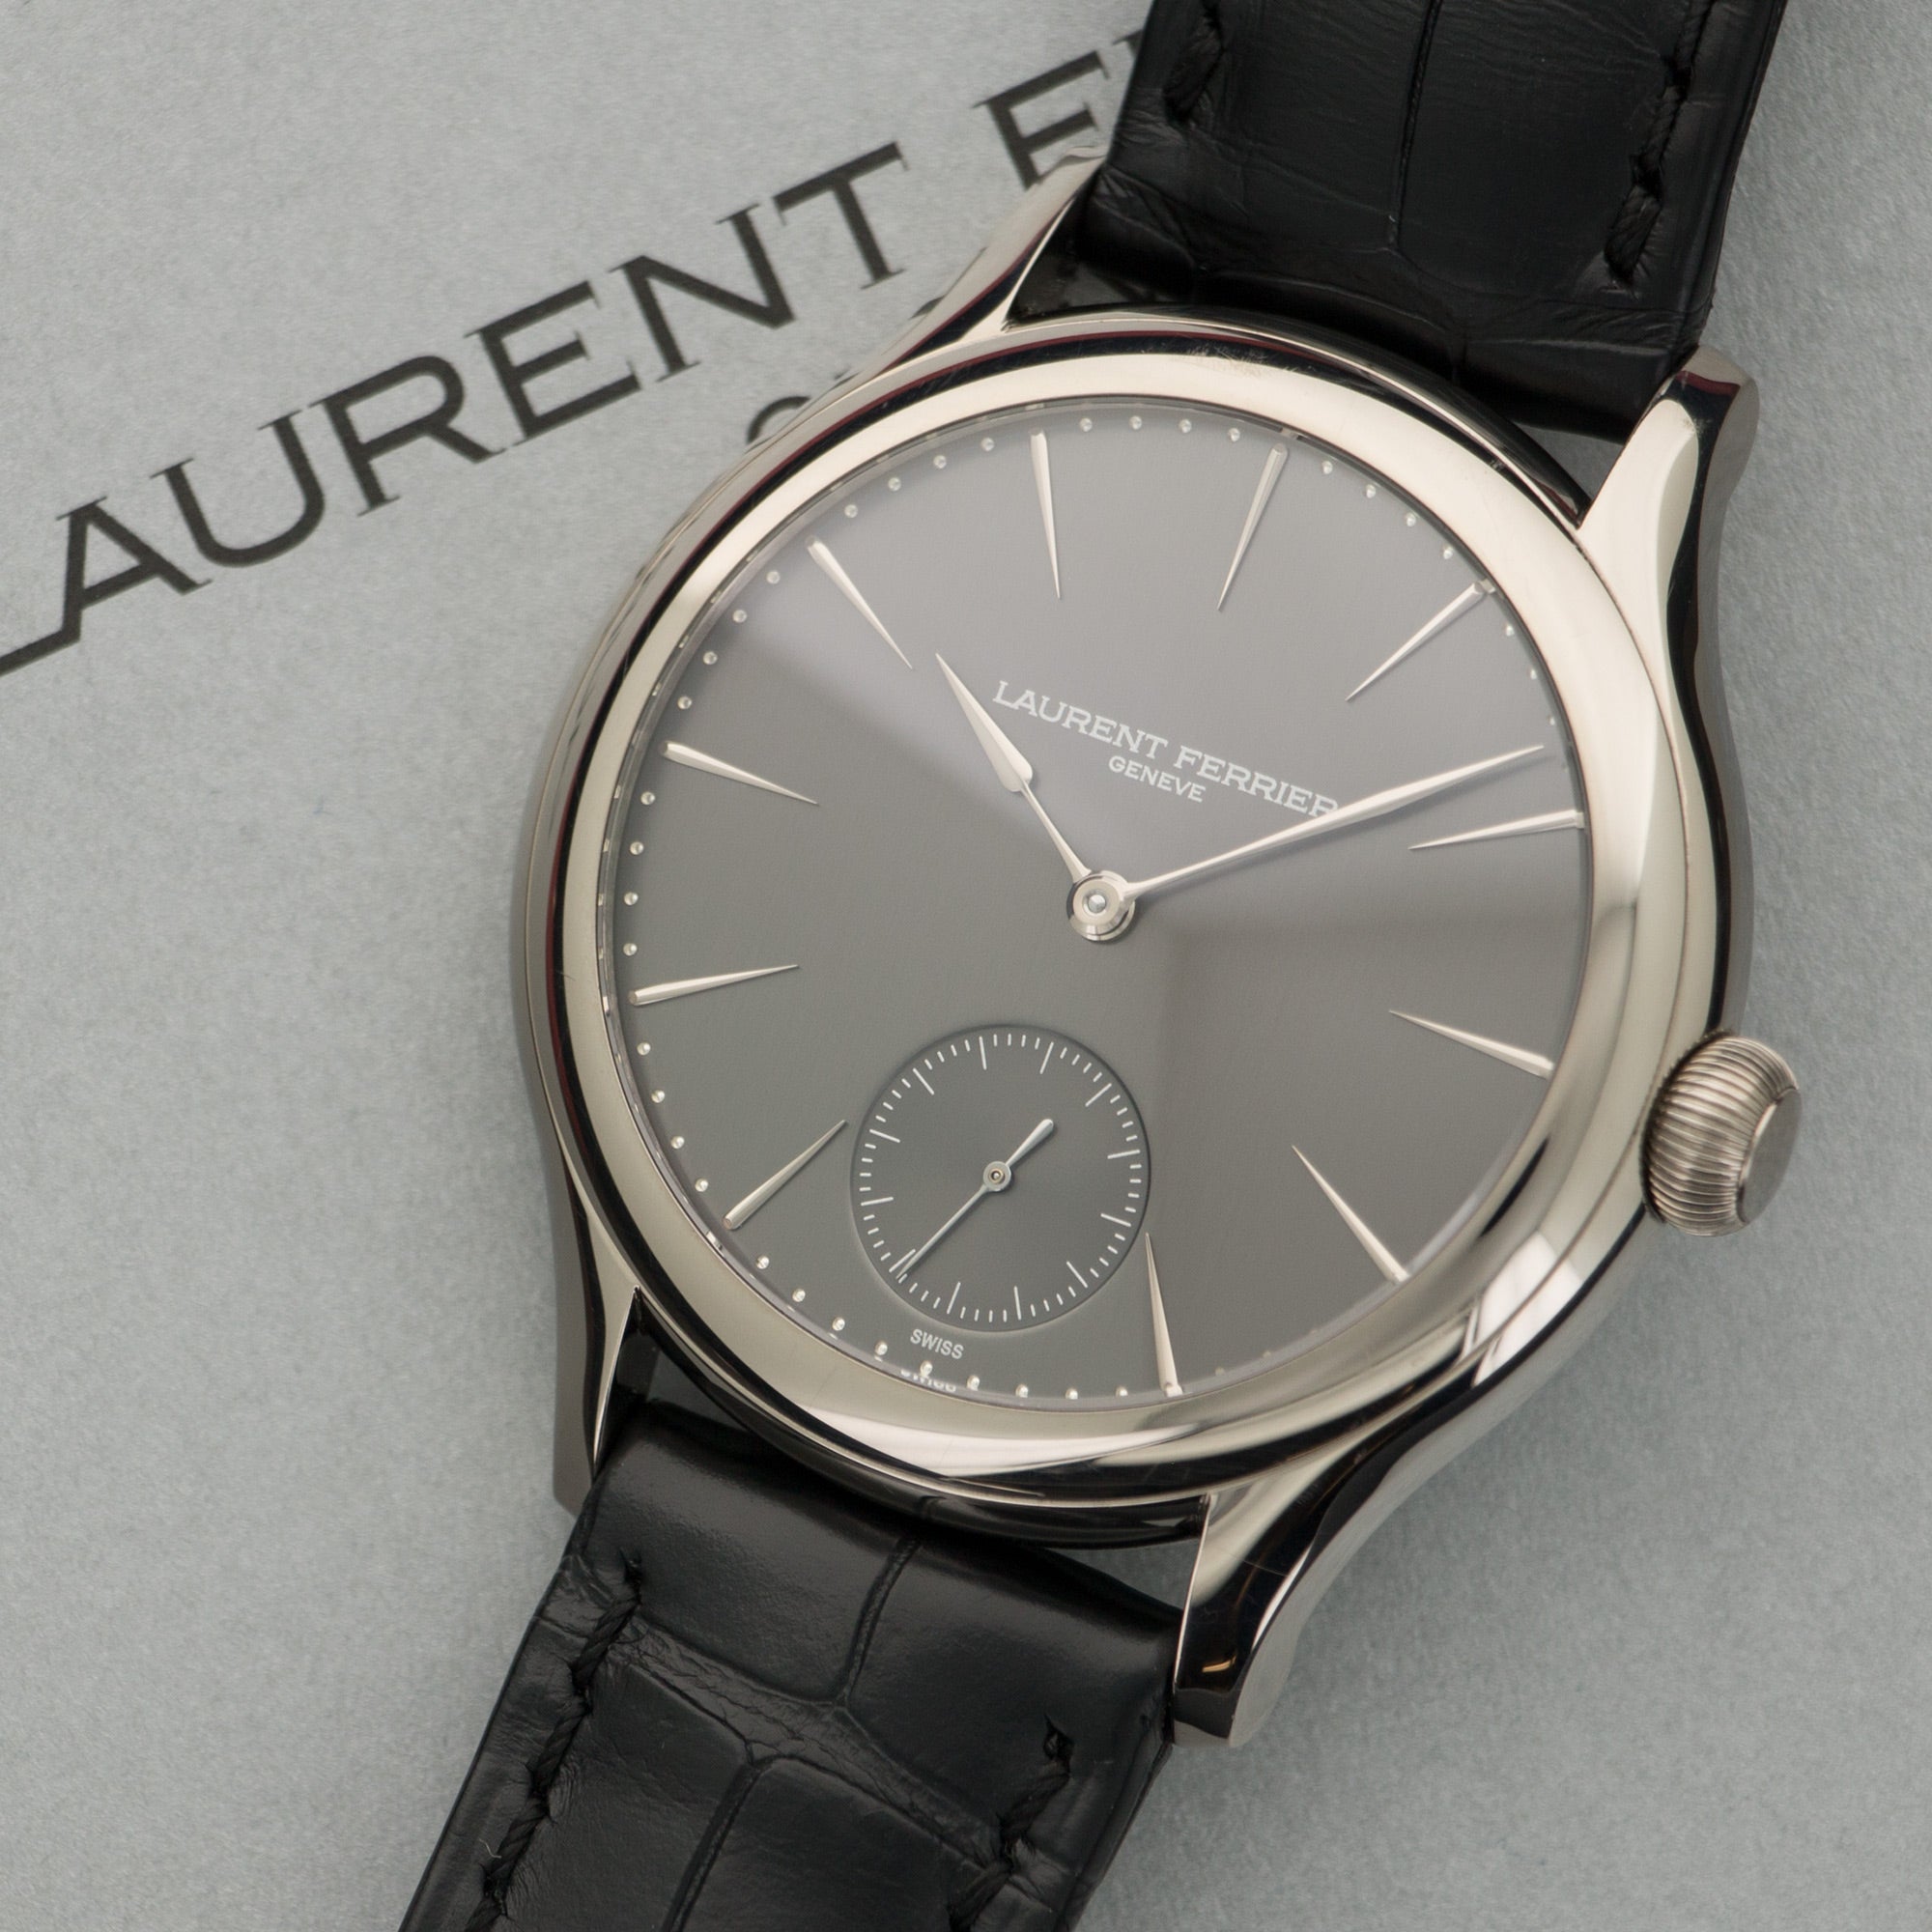 Laurent Ferrier - Laurent Ferrier White Gold Galet Micro-Rotor Watch, ref. LF229.01 - The Keystone Watches